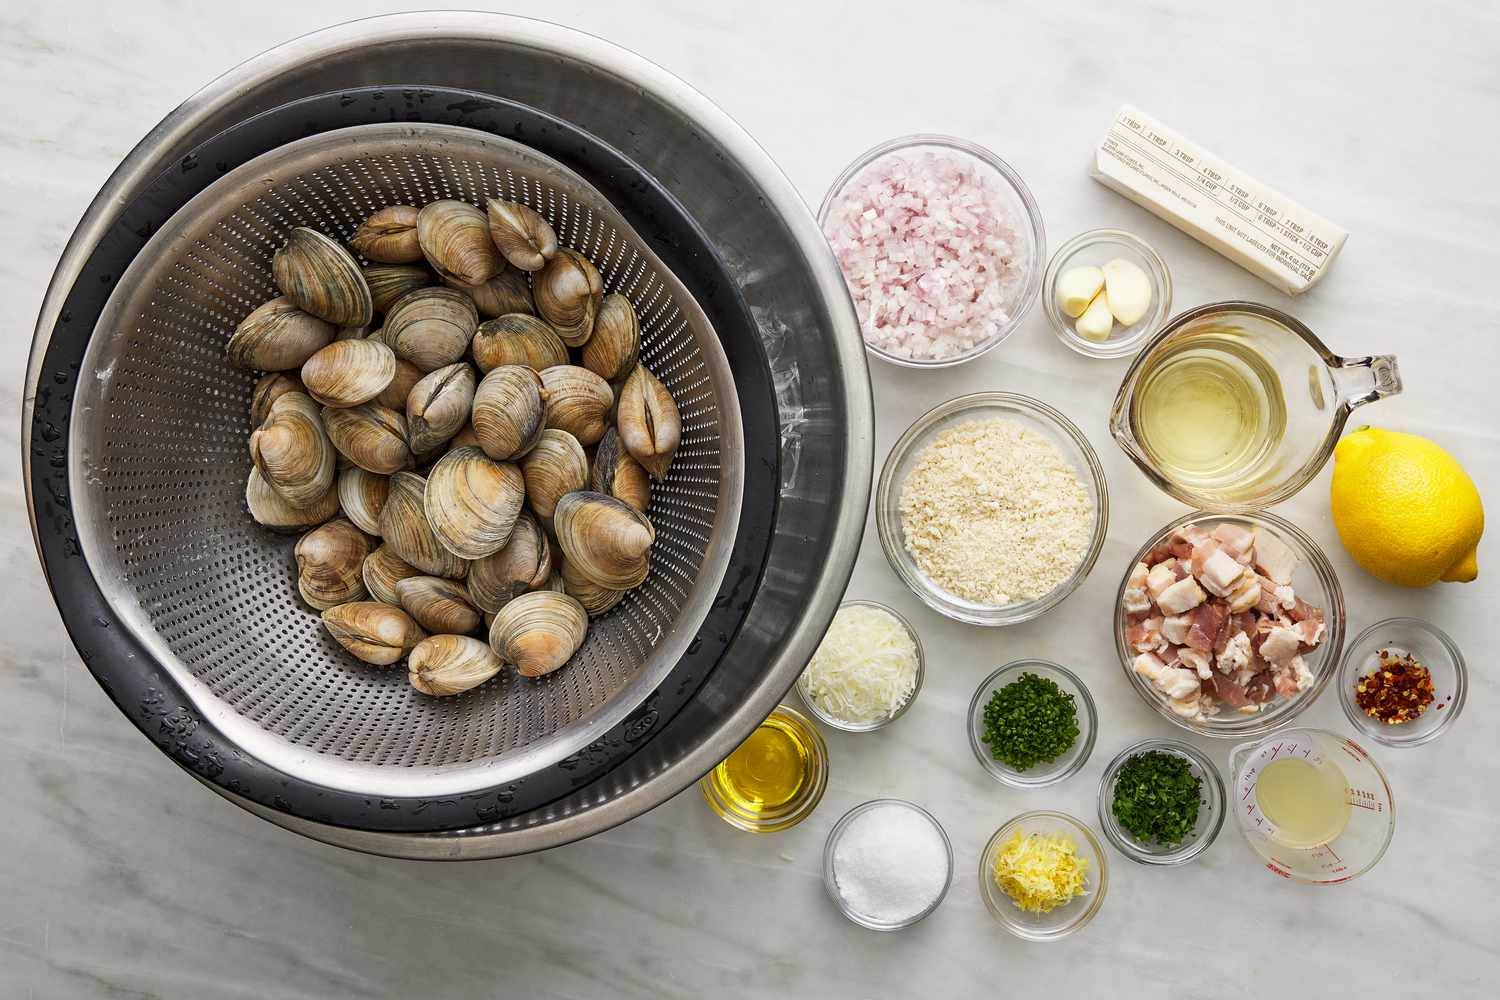 clams casino ingredients